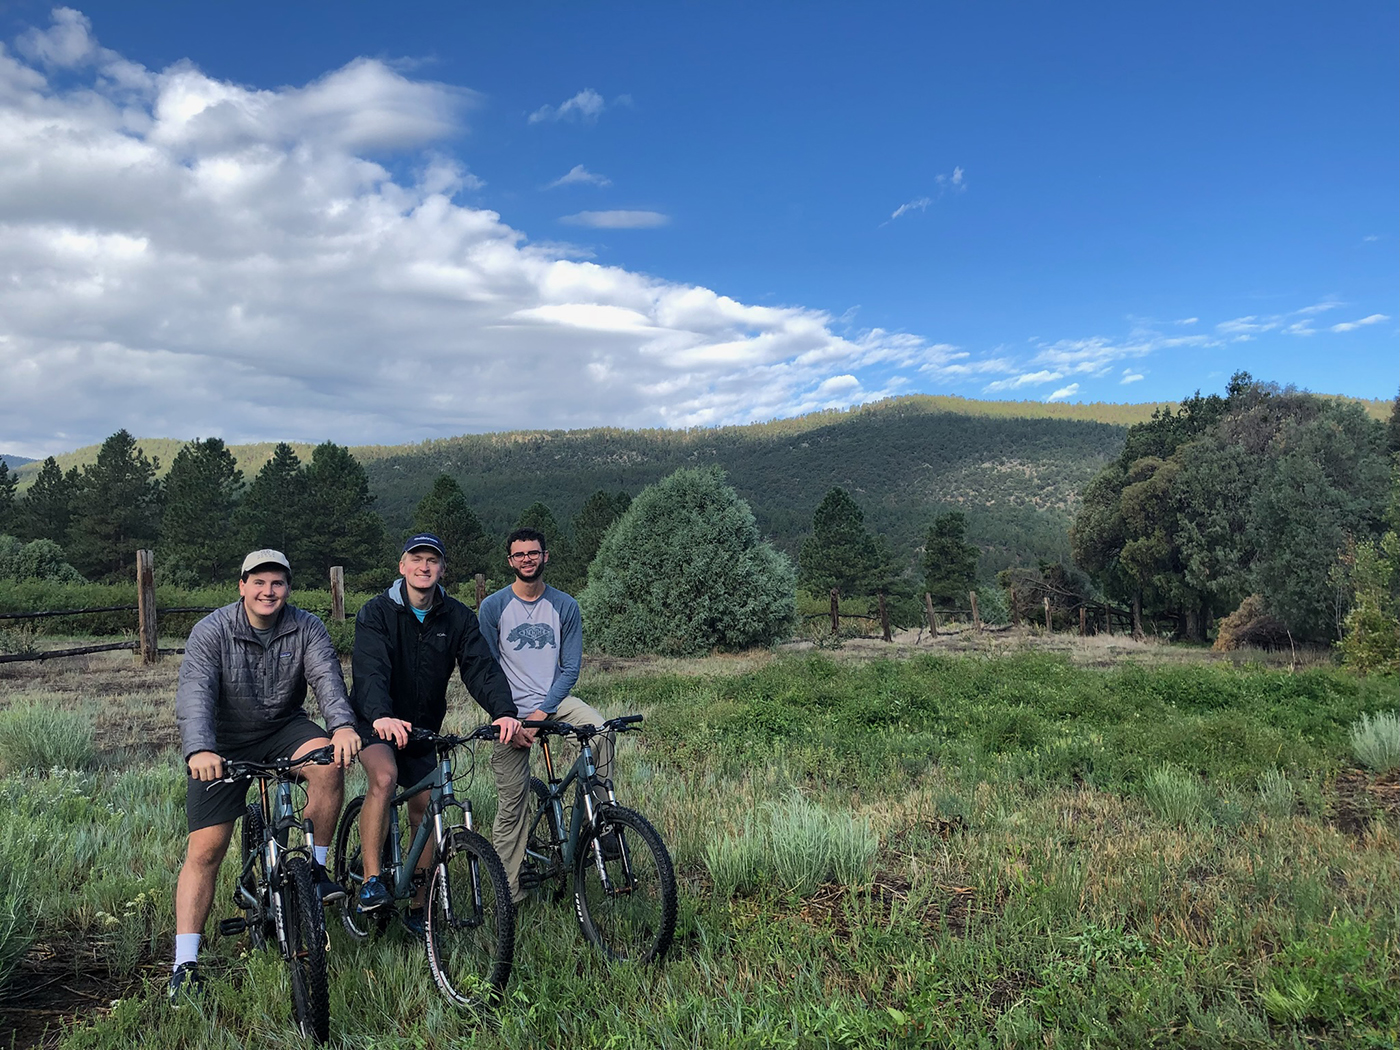 SMU-in-Taos students enjoy a bike ride in the hills